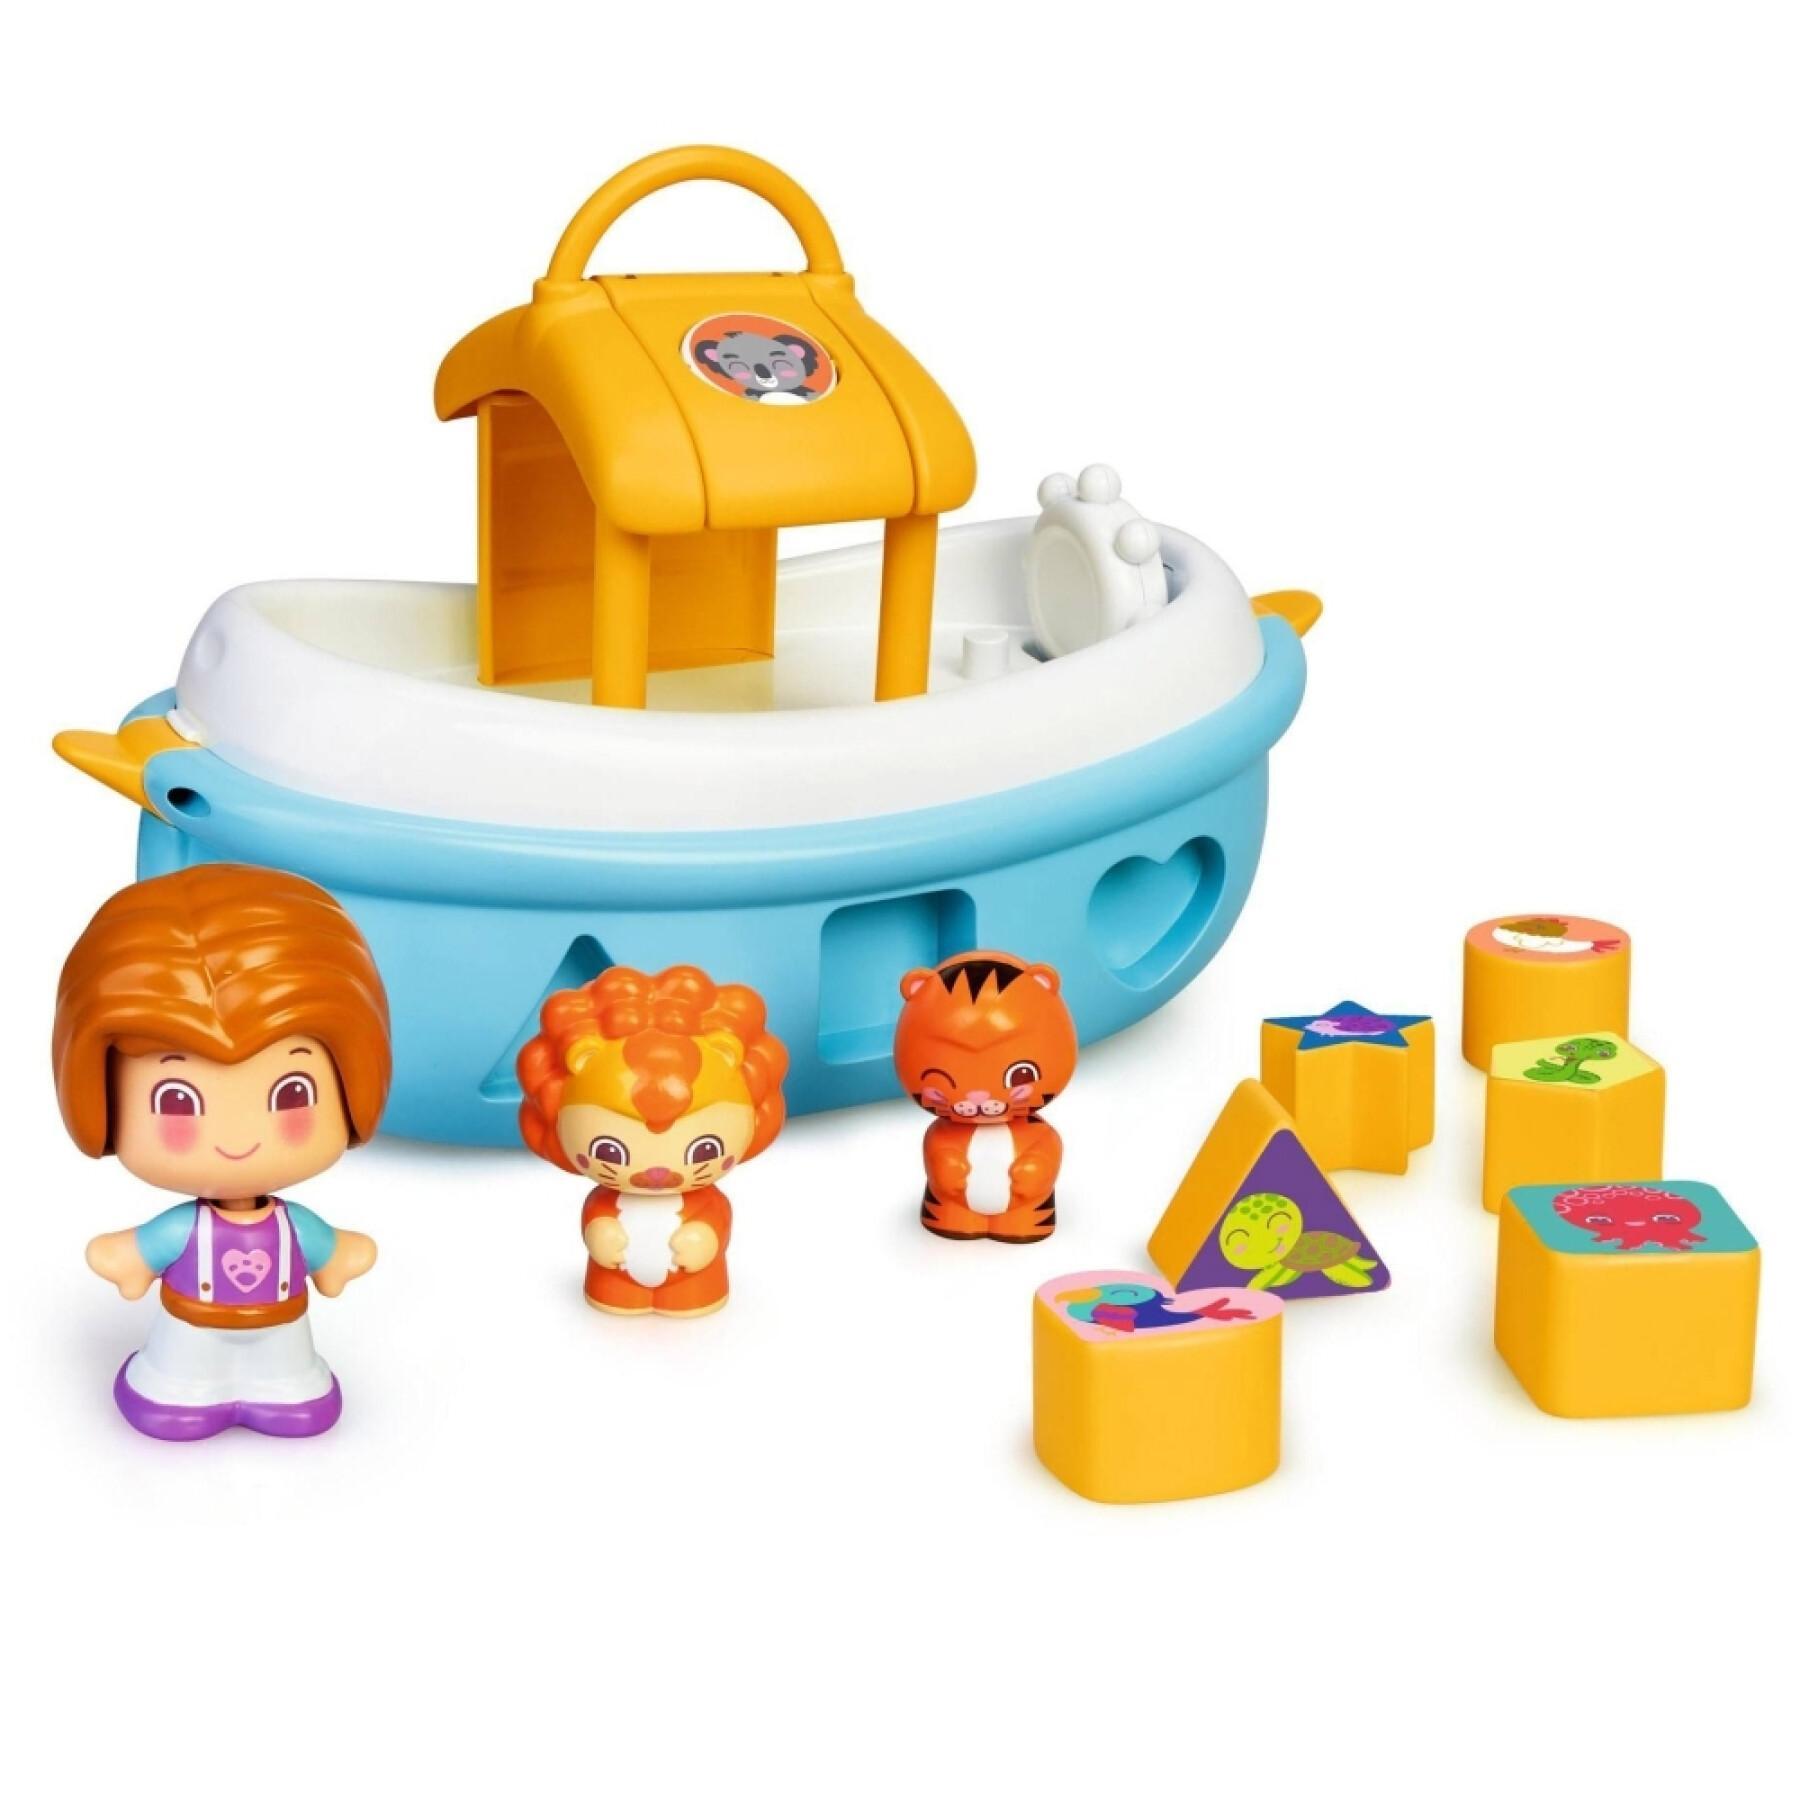 Noah's ark toy Famosa My First Pinypon